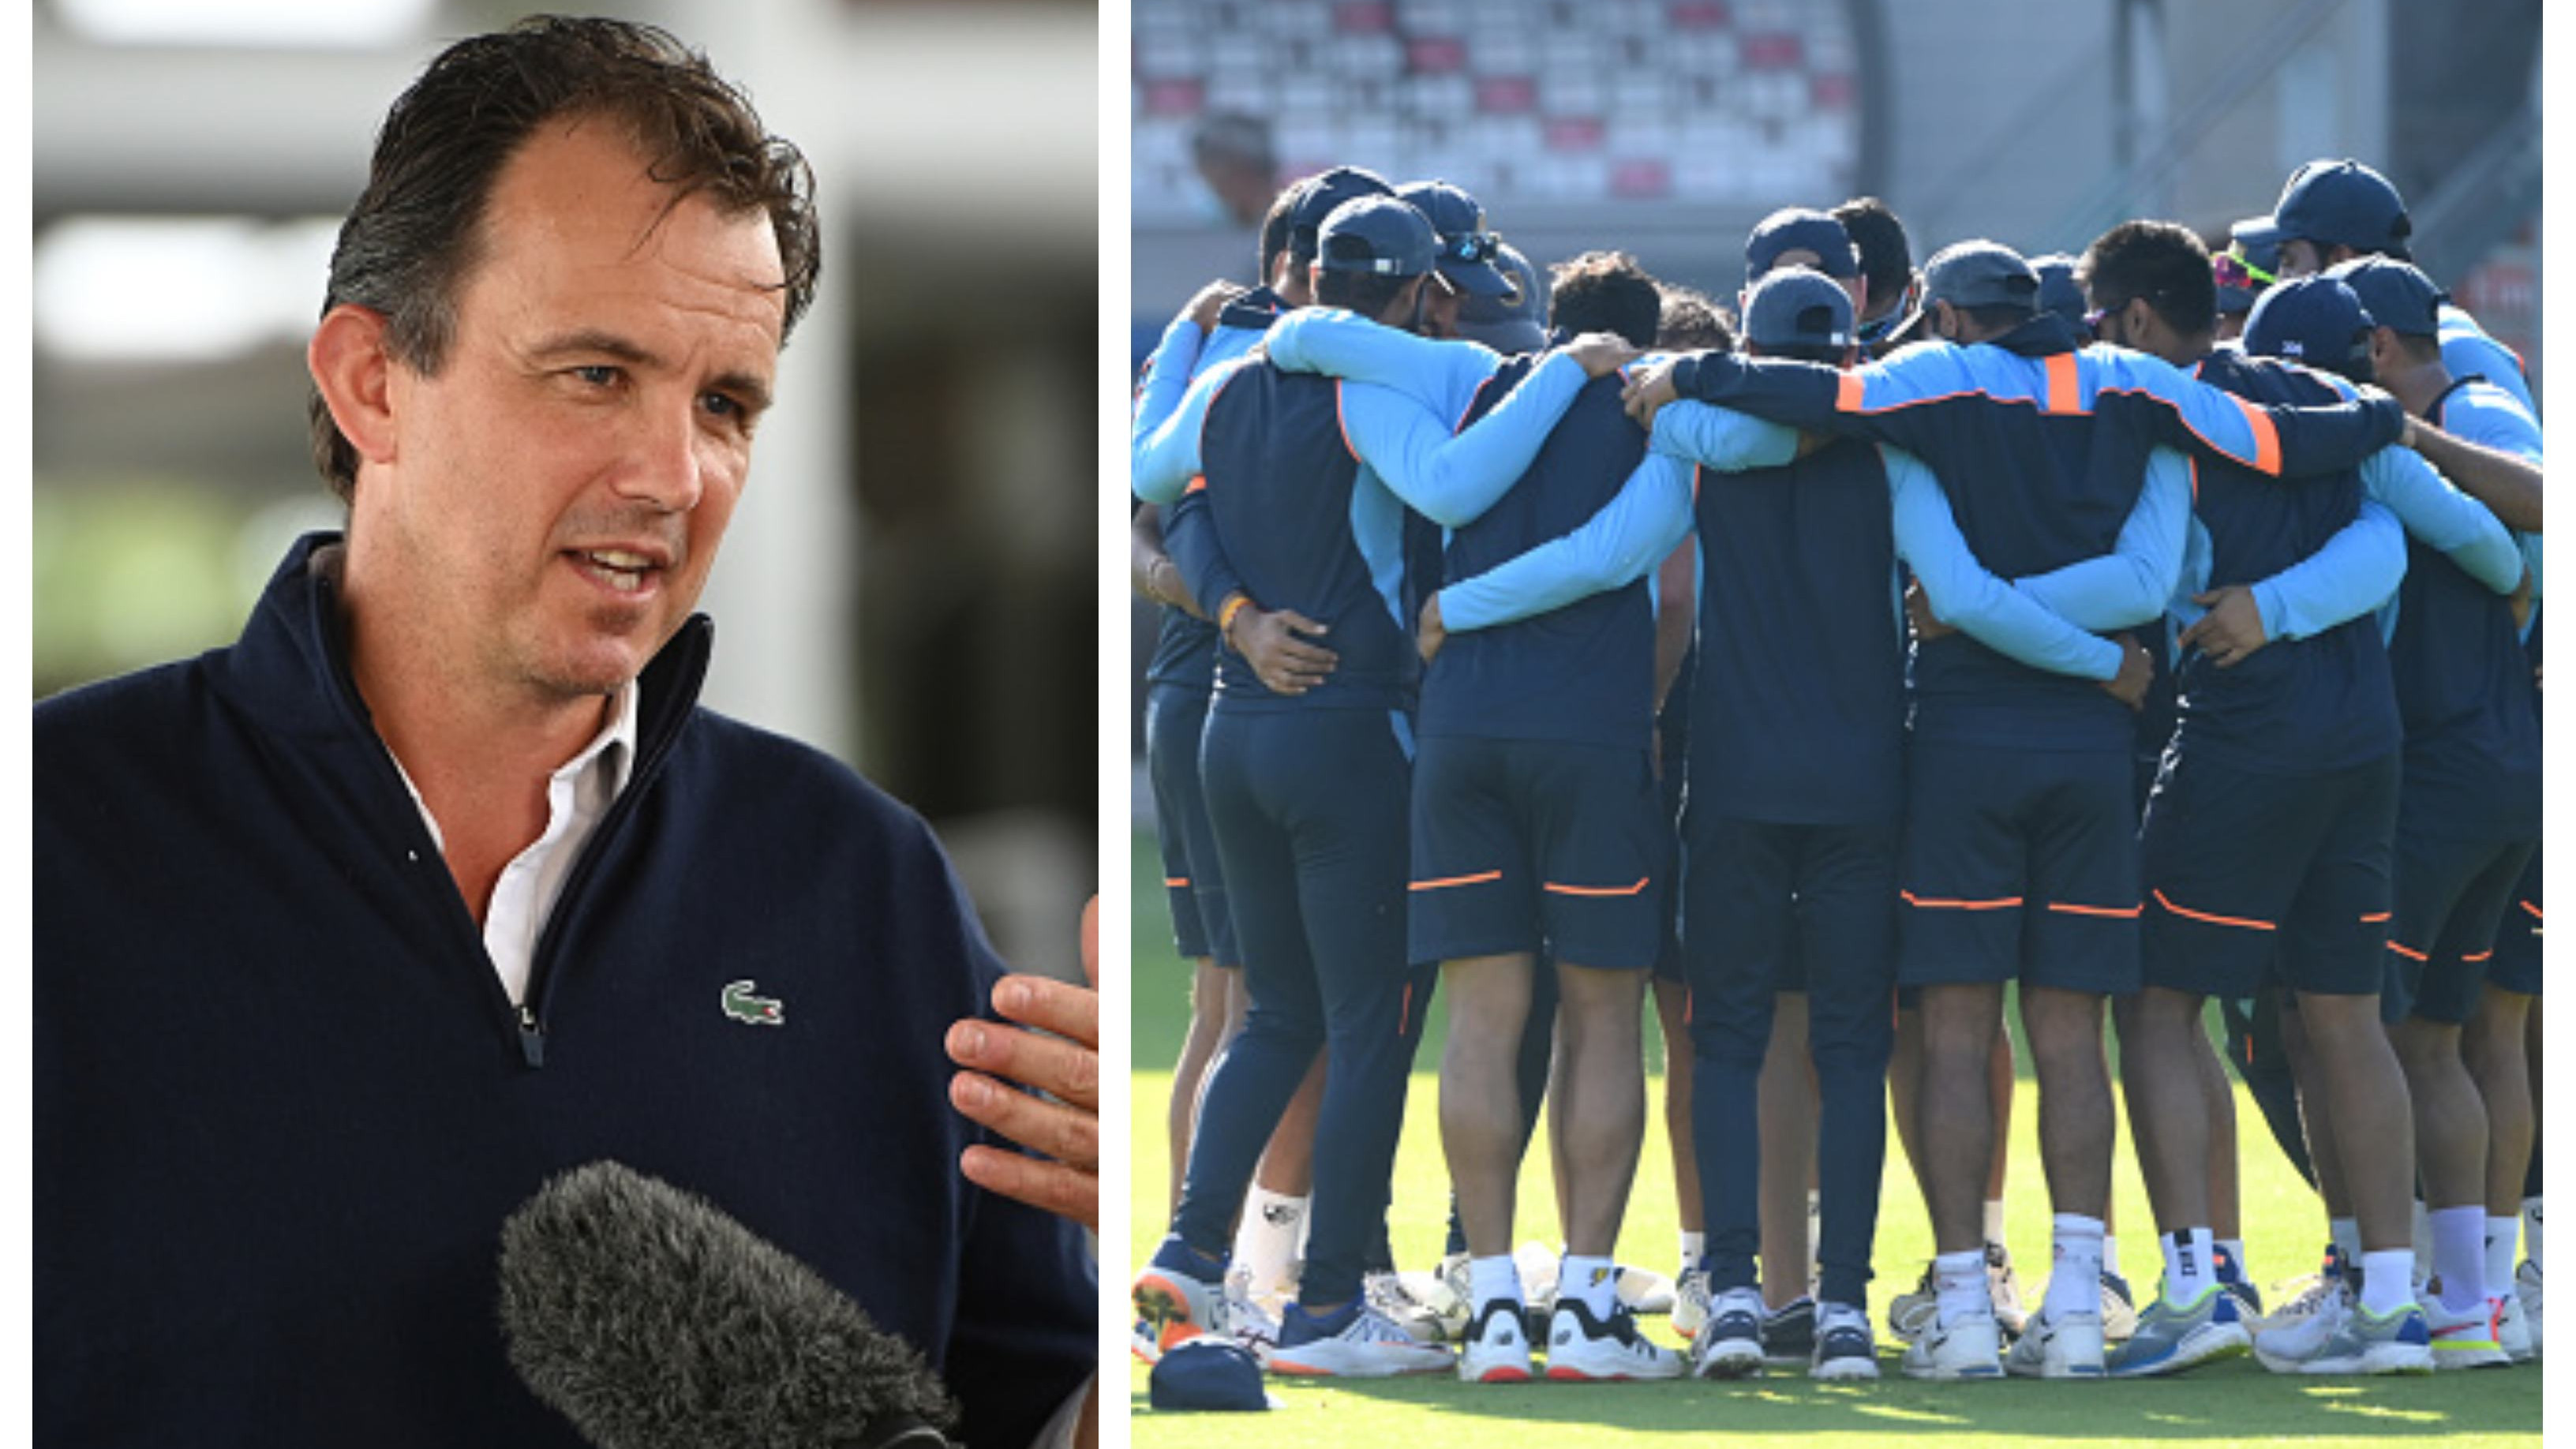 ENG v IND 2021: ECB CEO says ‘perception of what might happen’ led to cancellation of 5th Test